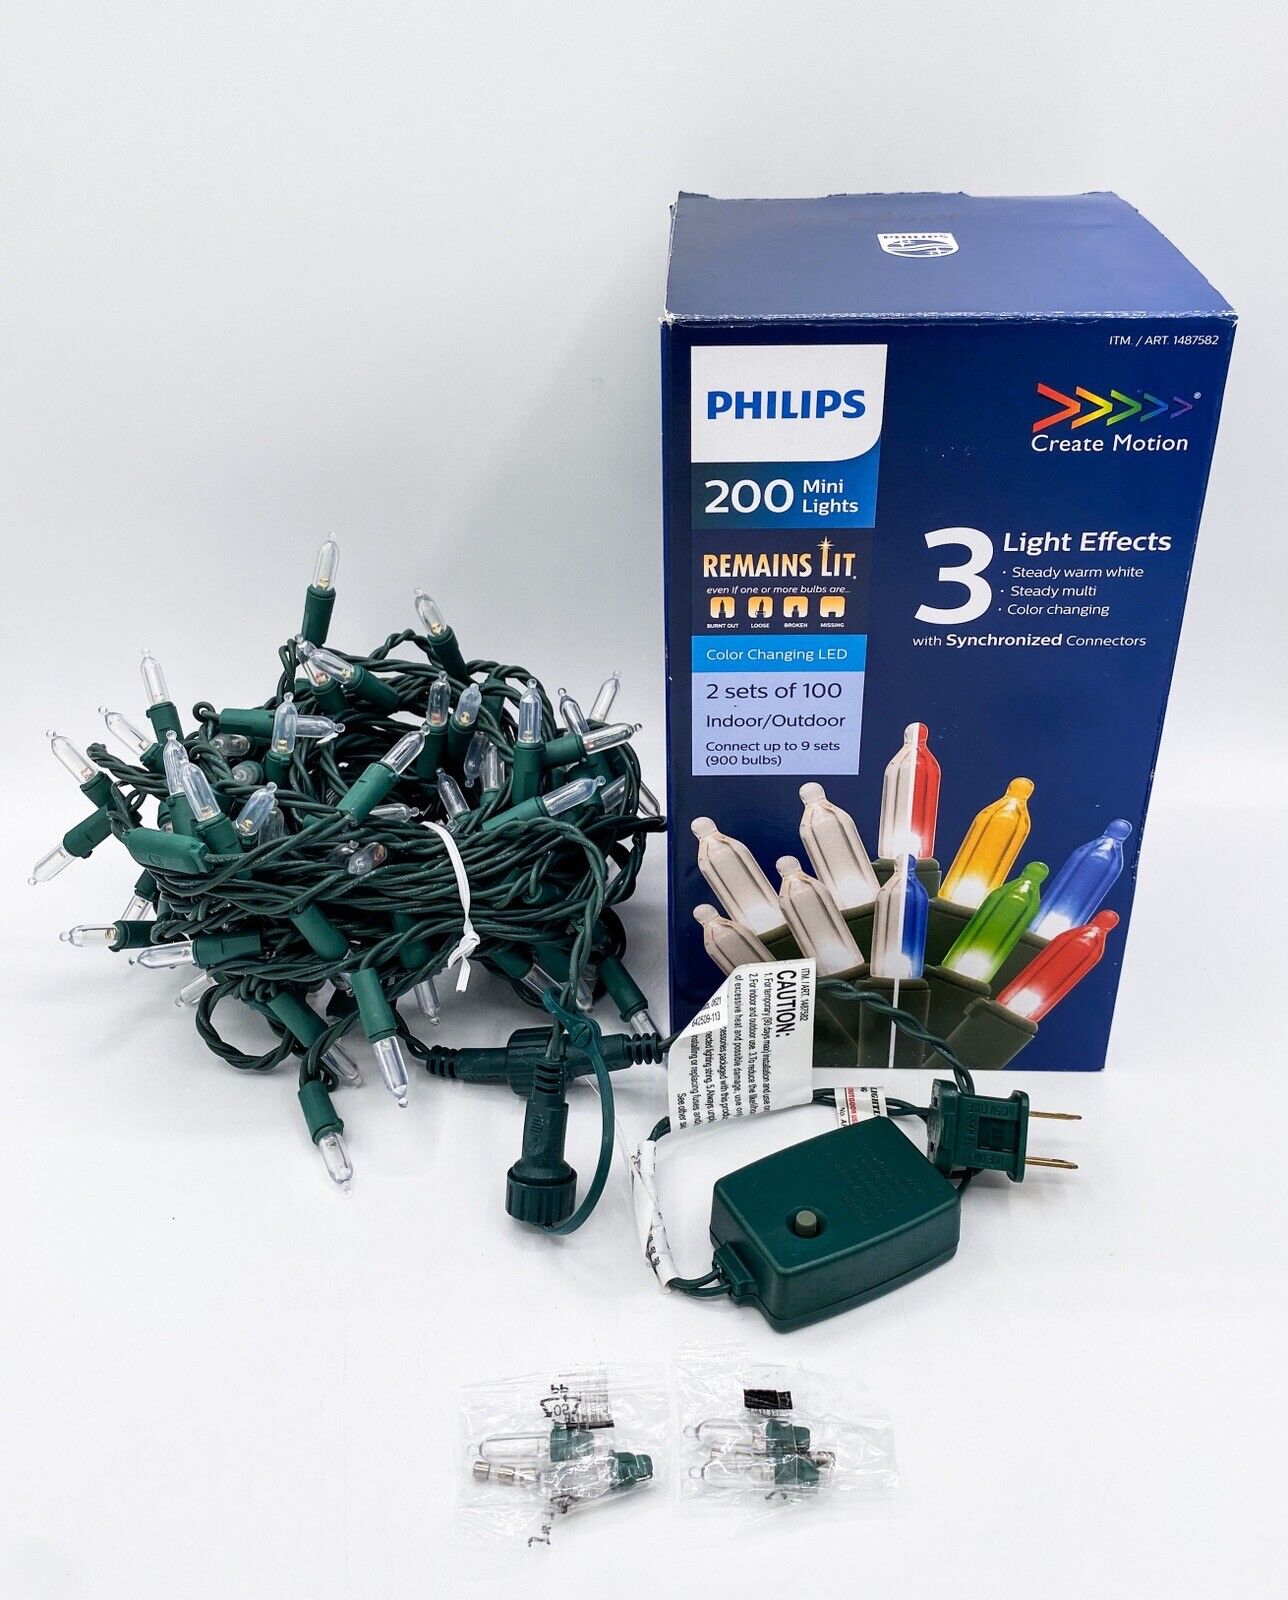 Philips LED Color Changing Remains Lit 100Ct. Main Christmas Light String ONLY